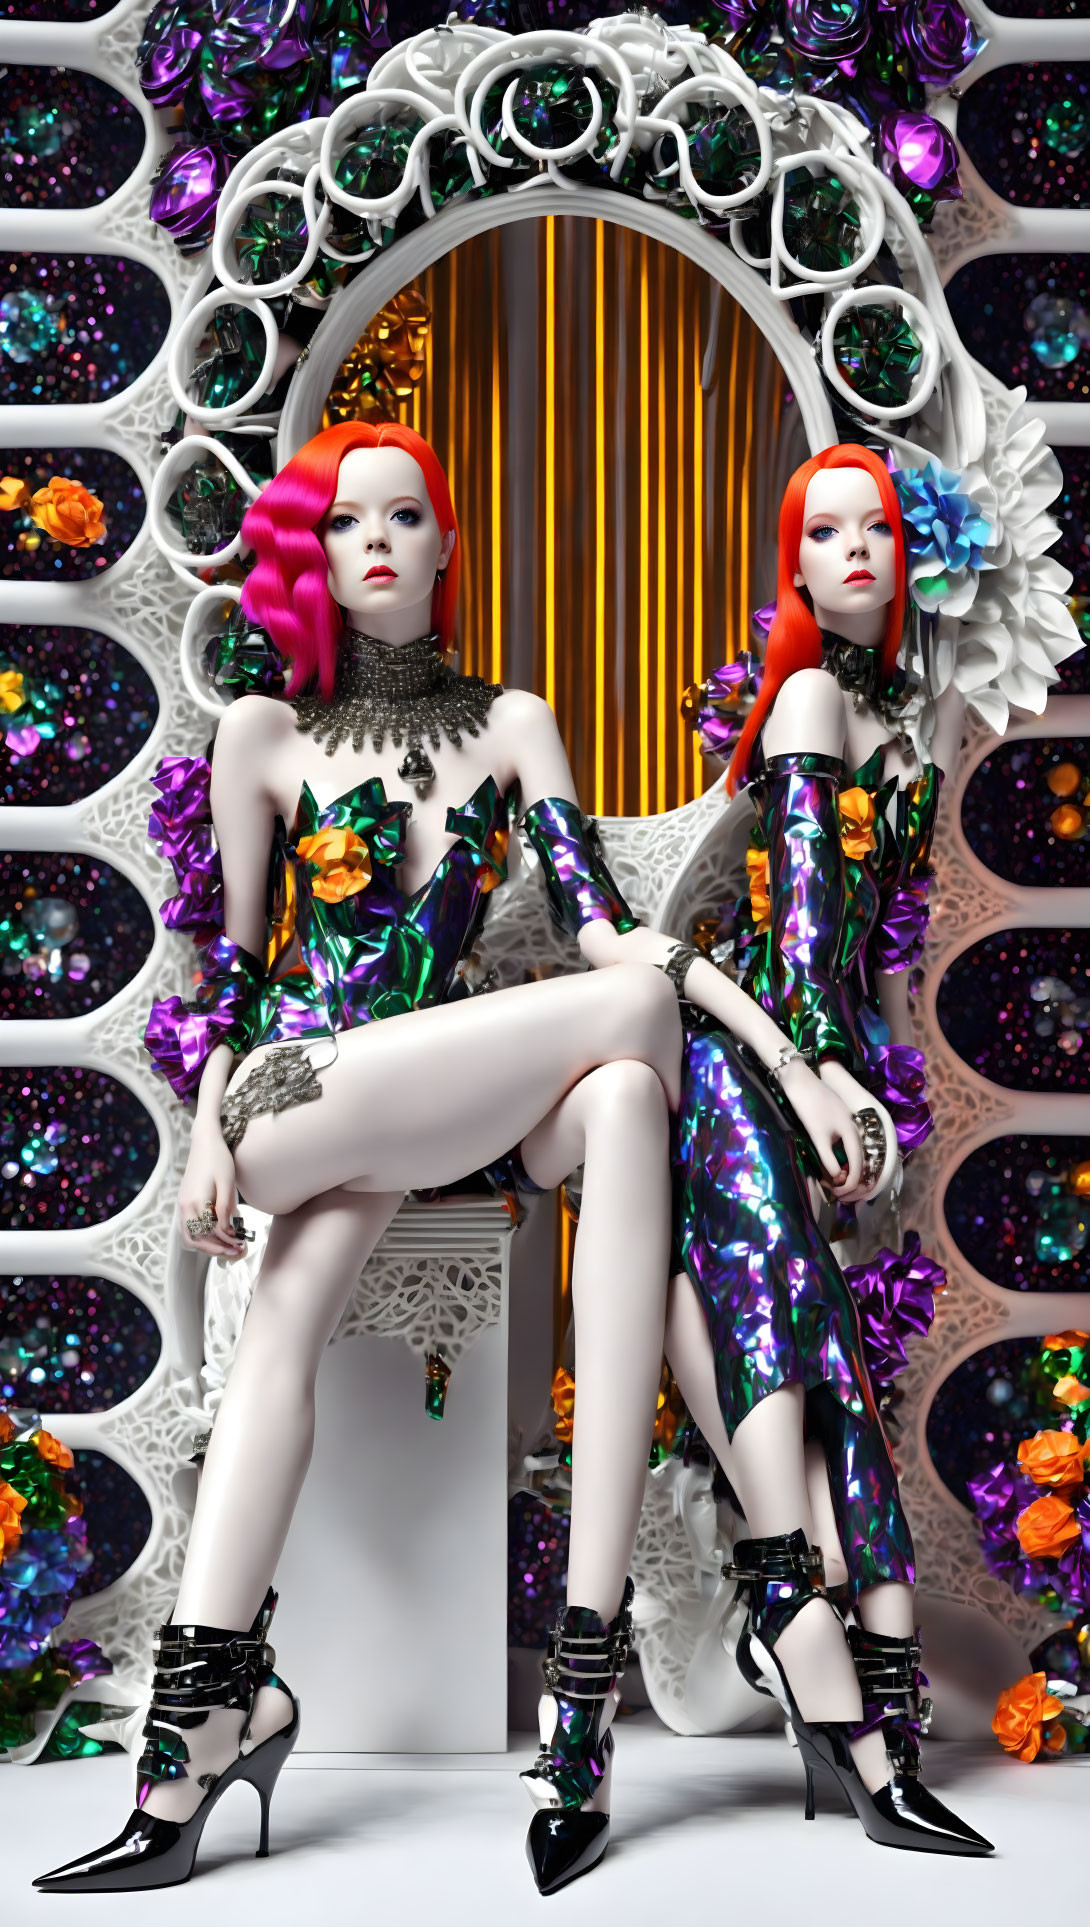 Vibrant hair mannequins in floral outfits with ornate mirror and purple flowers